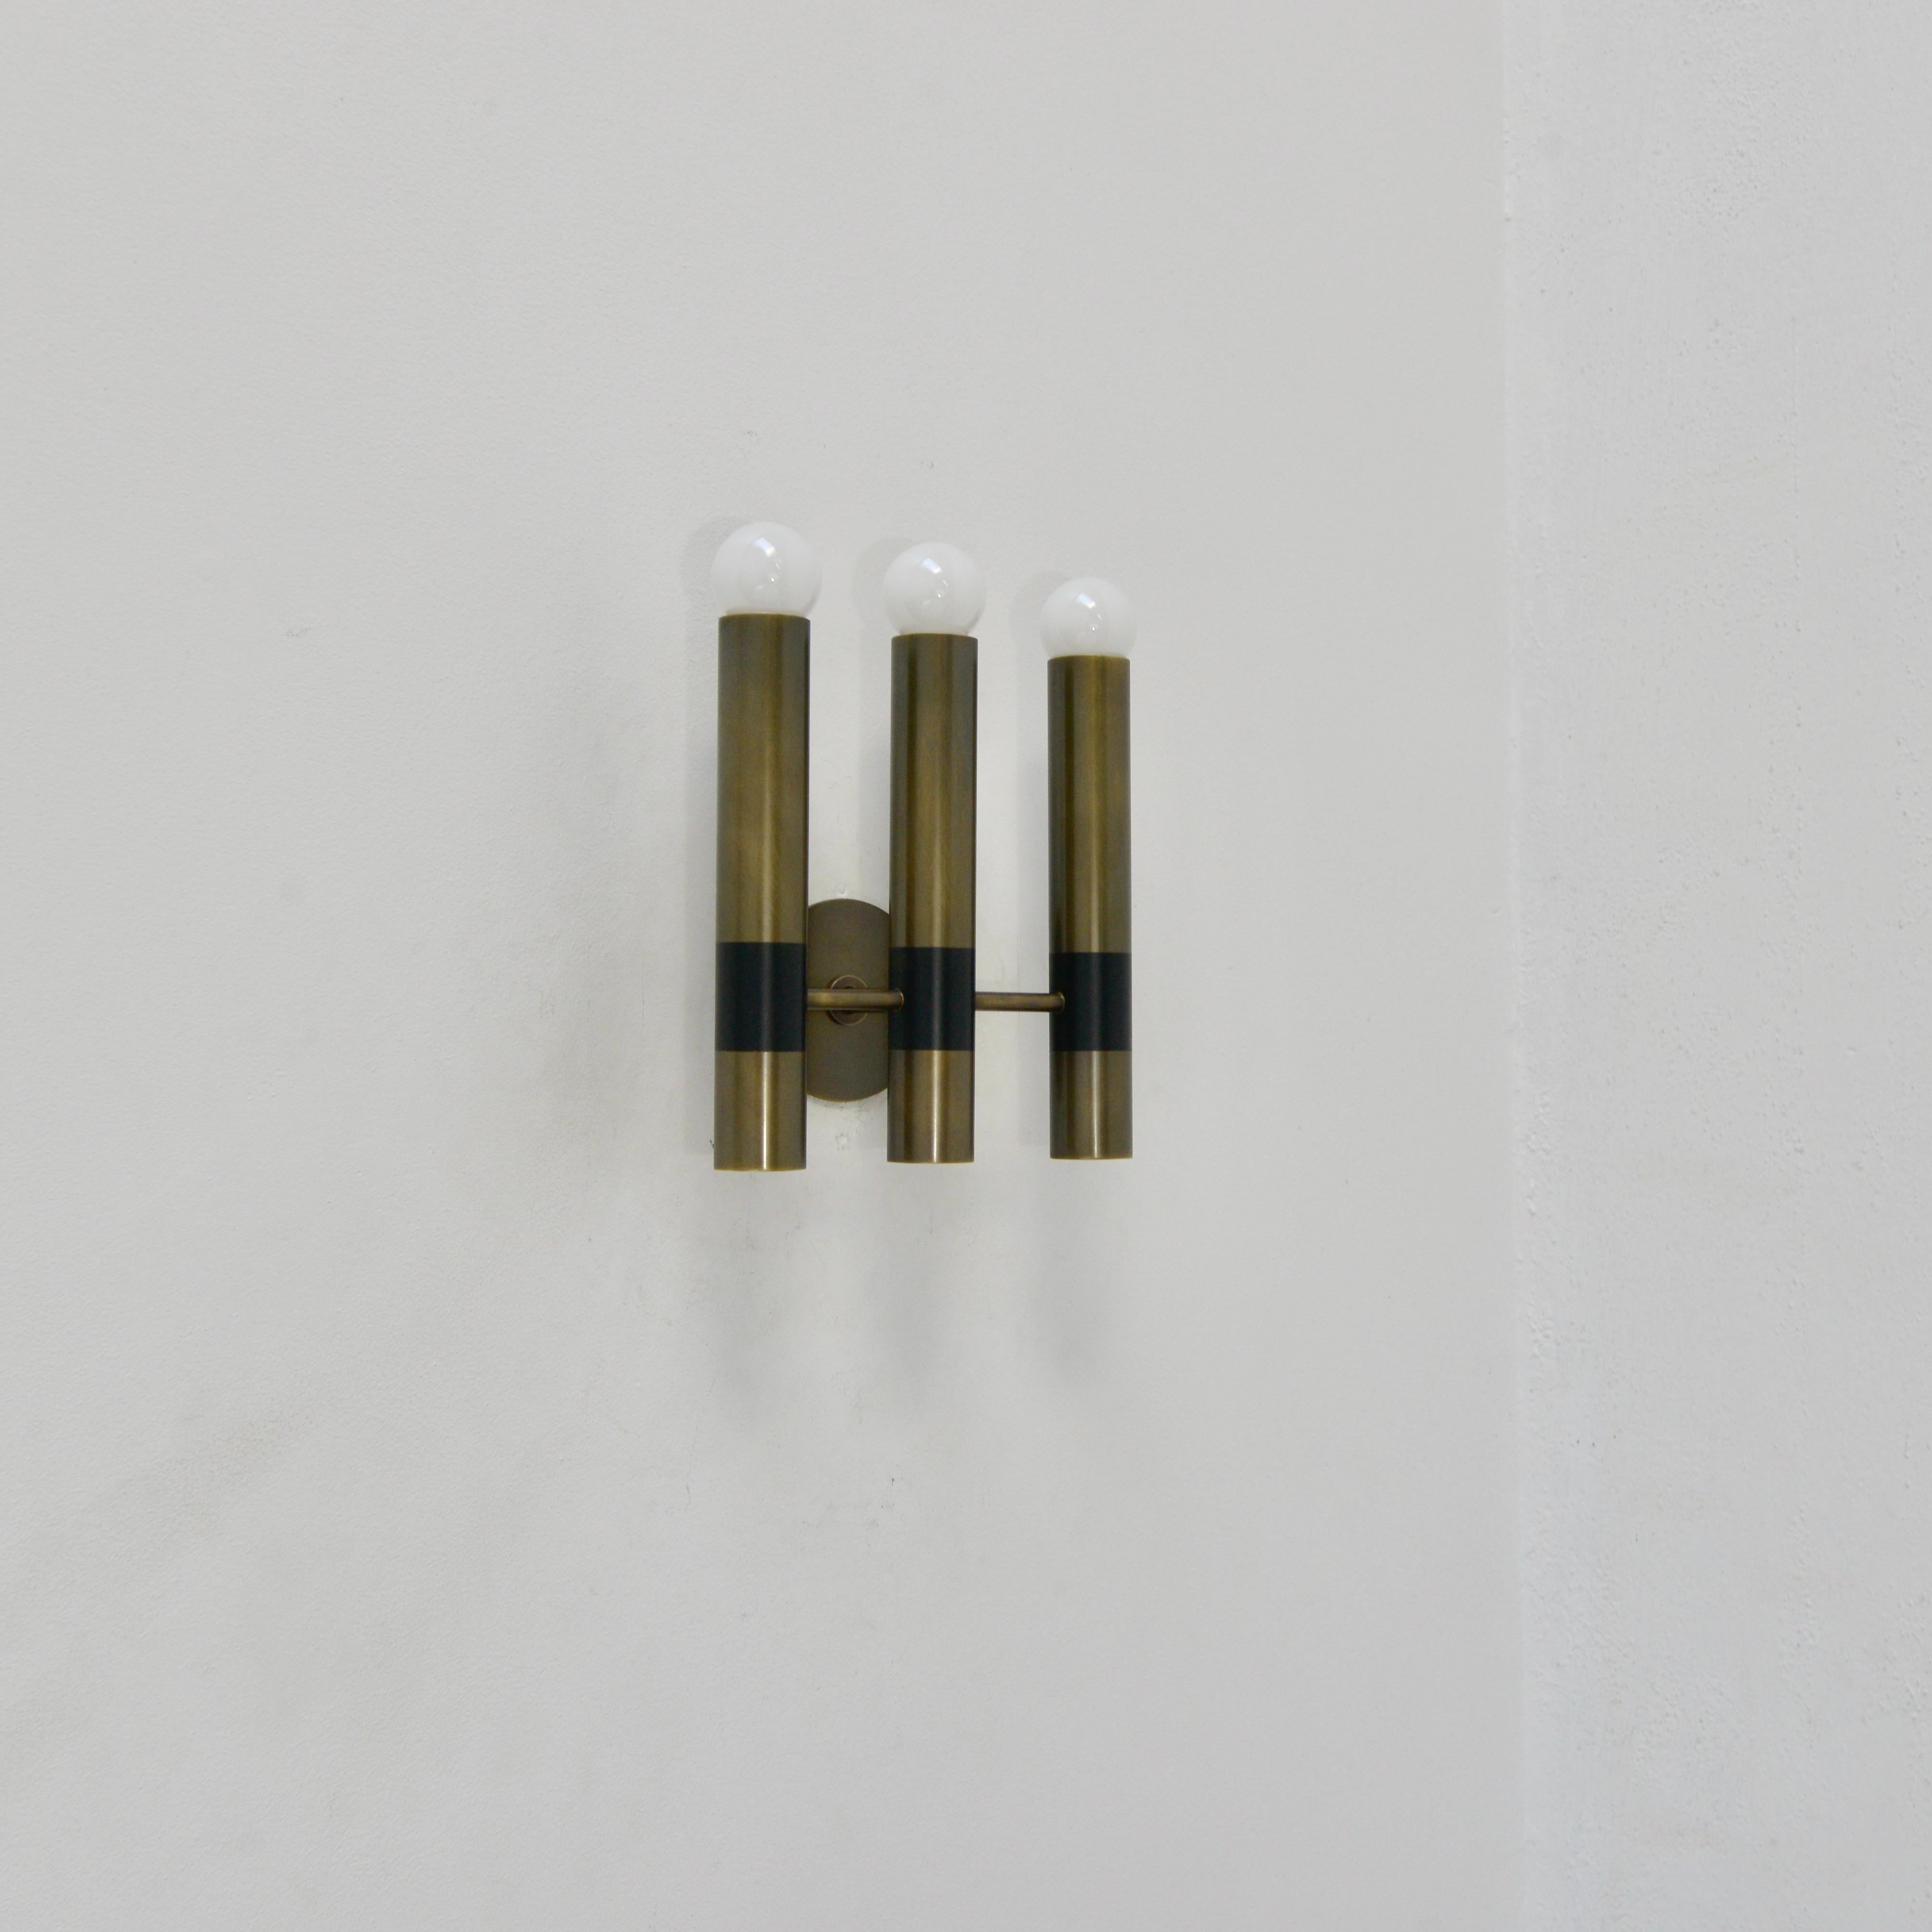 Elegant tubular TriLU wall sconce by Lumfardo Luminaires is made to order. This trident sconce has 3 tubular light sources in brass, aluminum and steel. Wired for the US with (3) E-12 candelabra based sockets. Lightbulbs included with order. 10-12